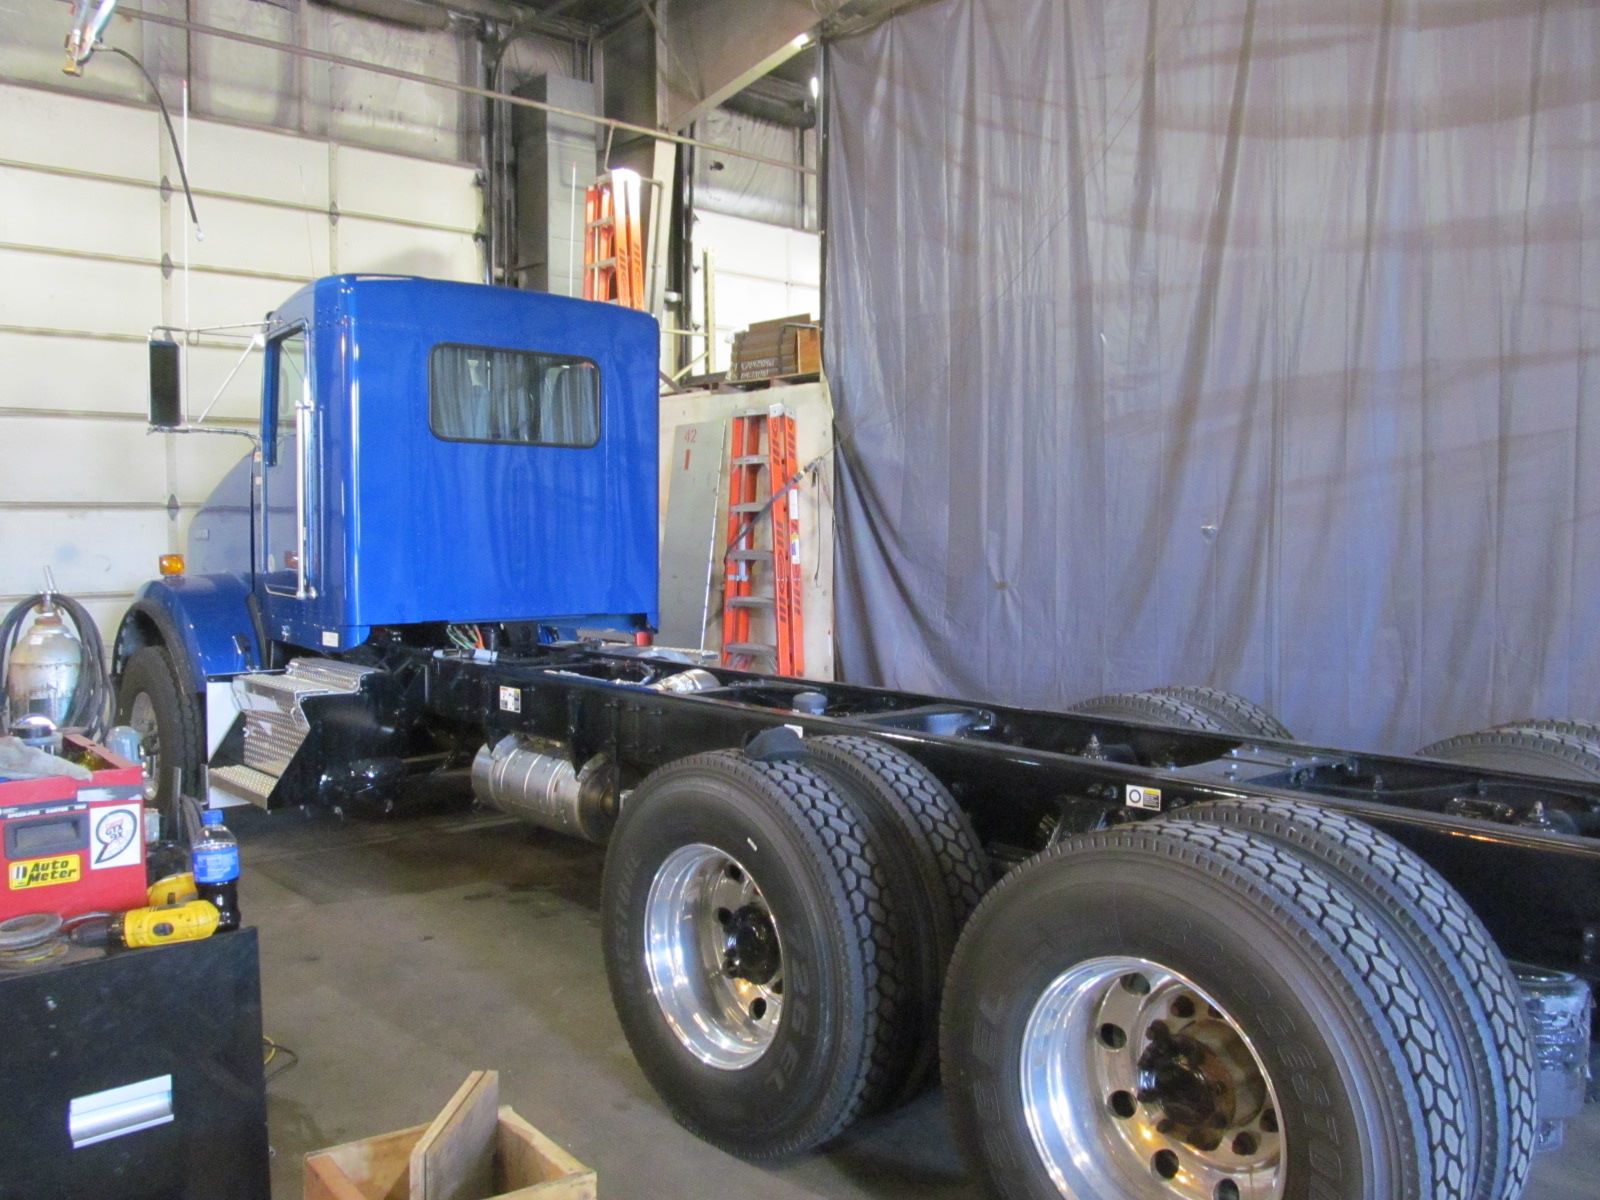 blue truck with a long trailer detatched